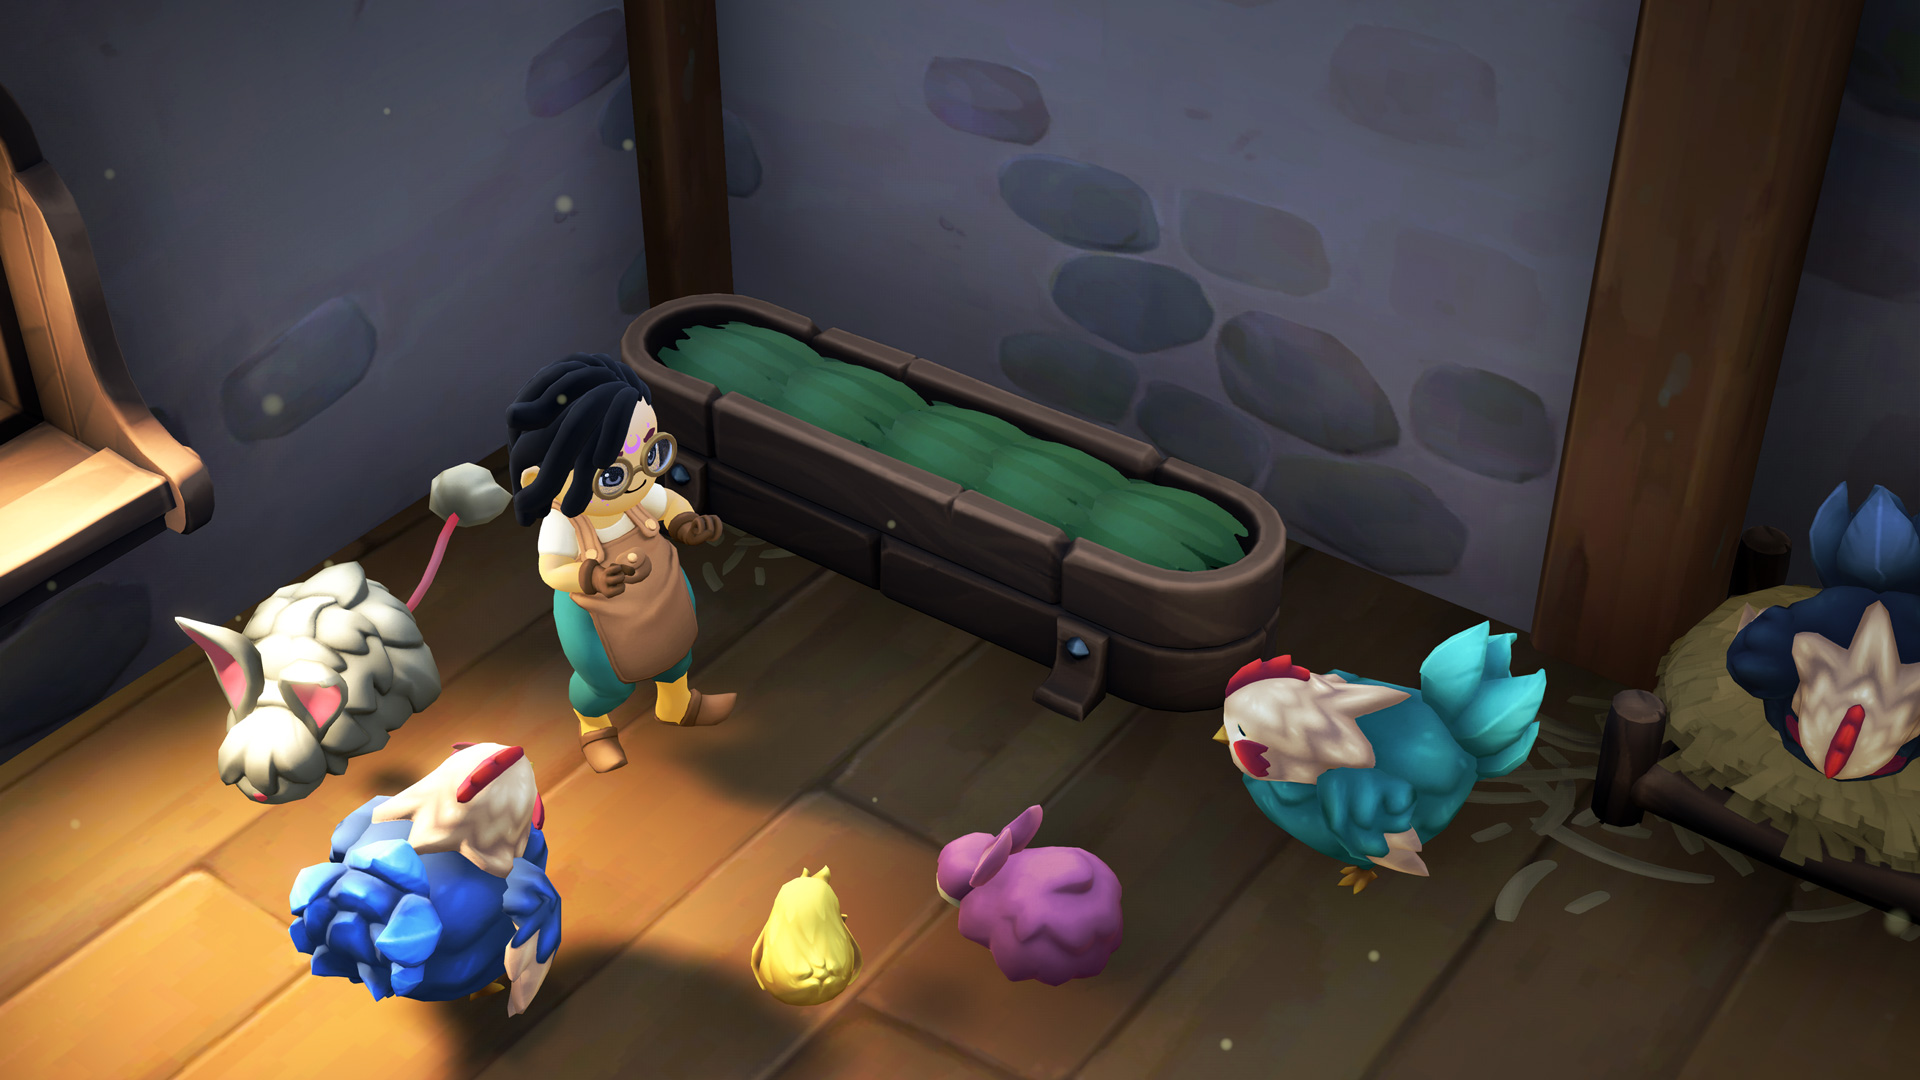 A screenshot from Fae Farm depicting the inside of a barn area with fantastical animals surrounding a player character